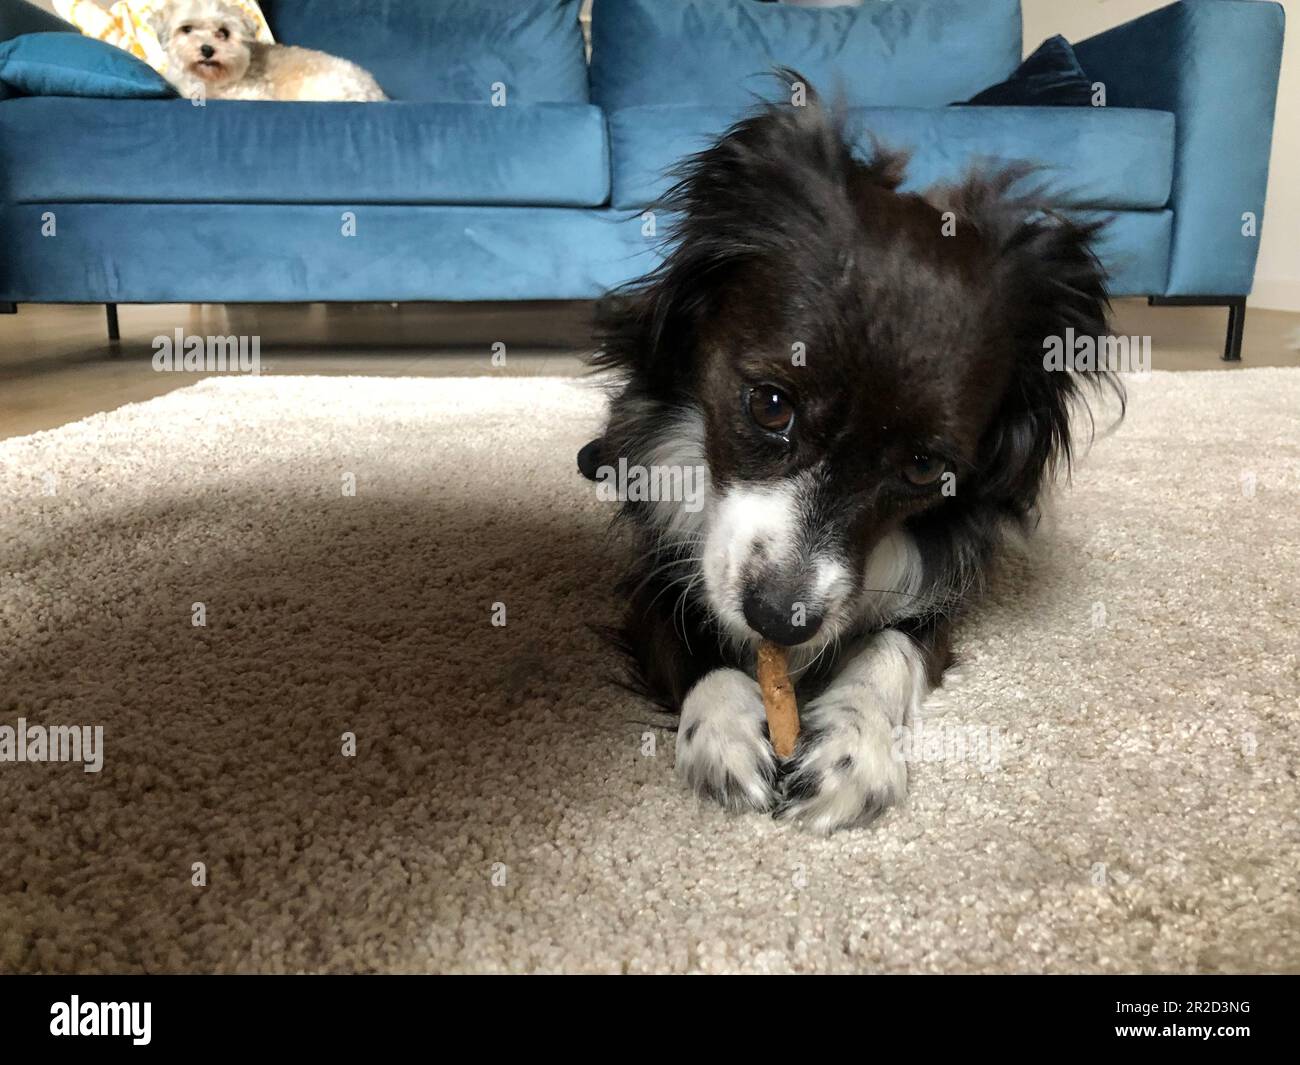 Adorable mini border collie chewing a toy while a habanese observes Stock Photo